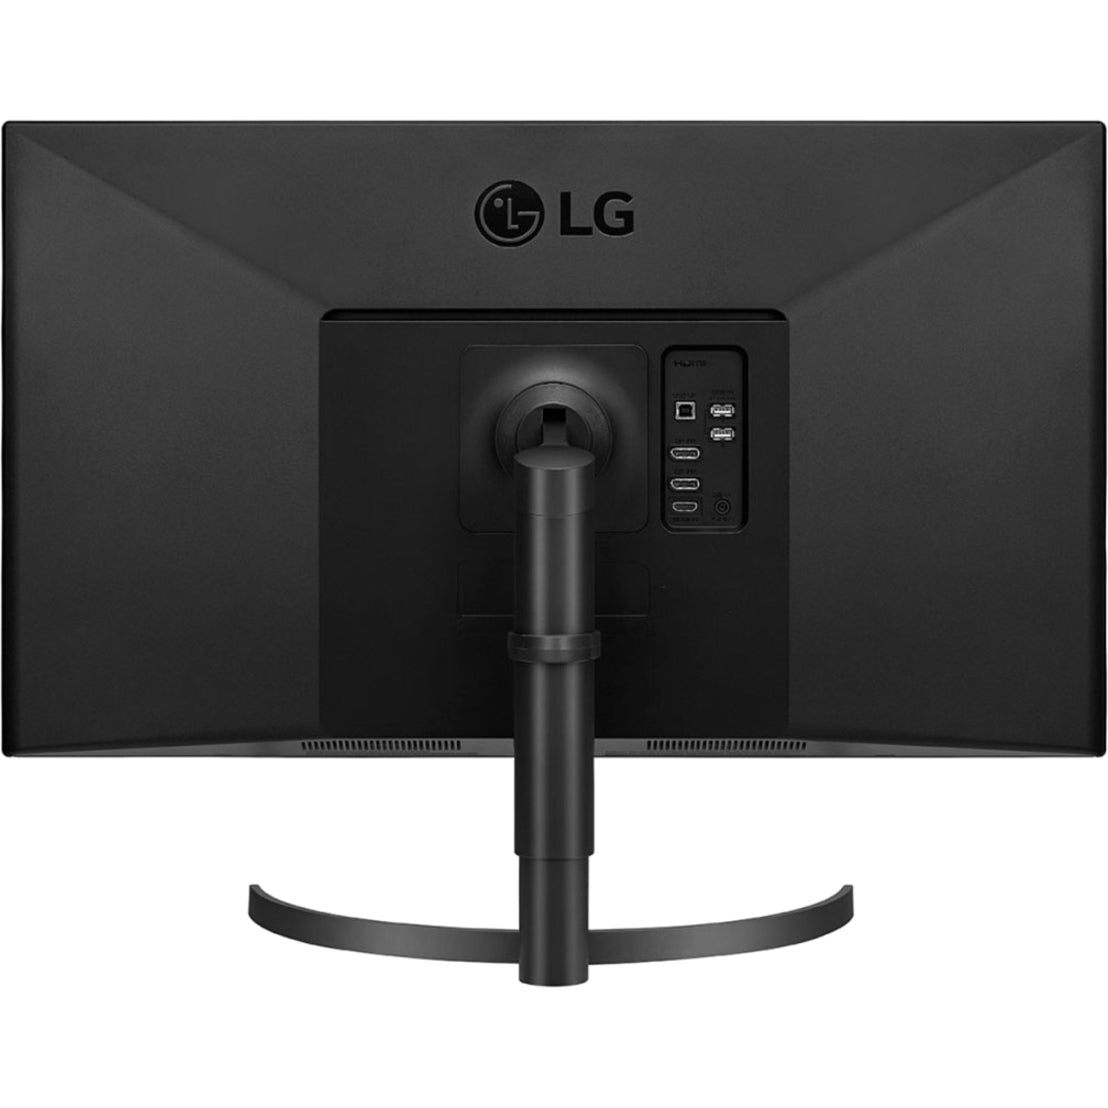 LG 32HL512D-B 32" 4K LCD Monitor, TAA Compliant, 98% DCI-P3 Color Gamut, USB/HDMI/DisplayPort Connectivity